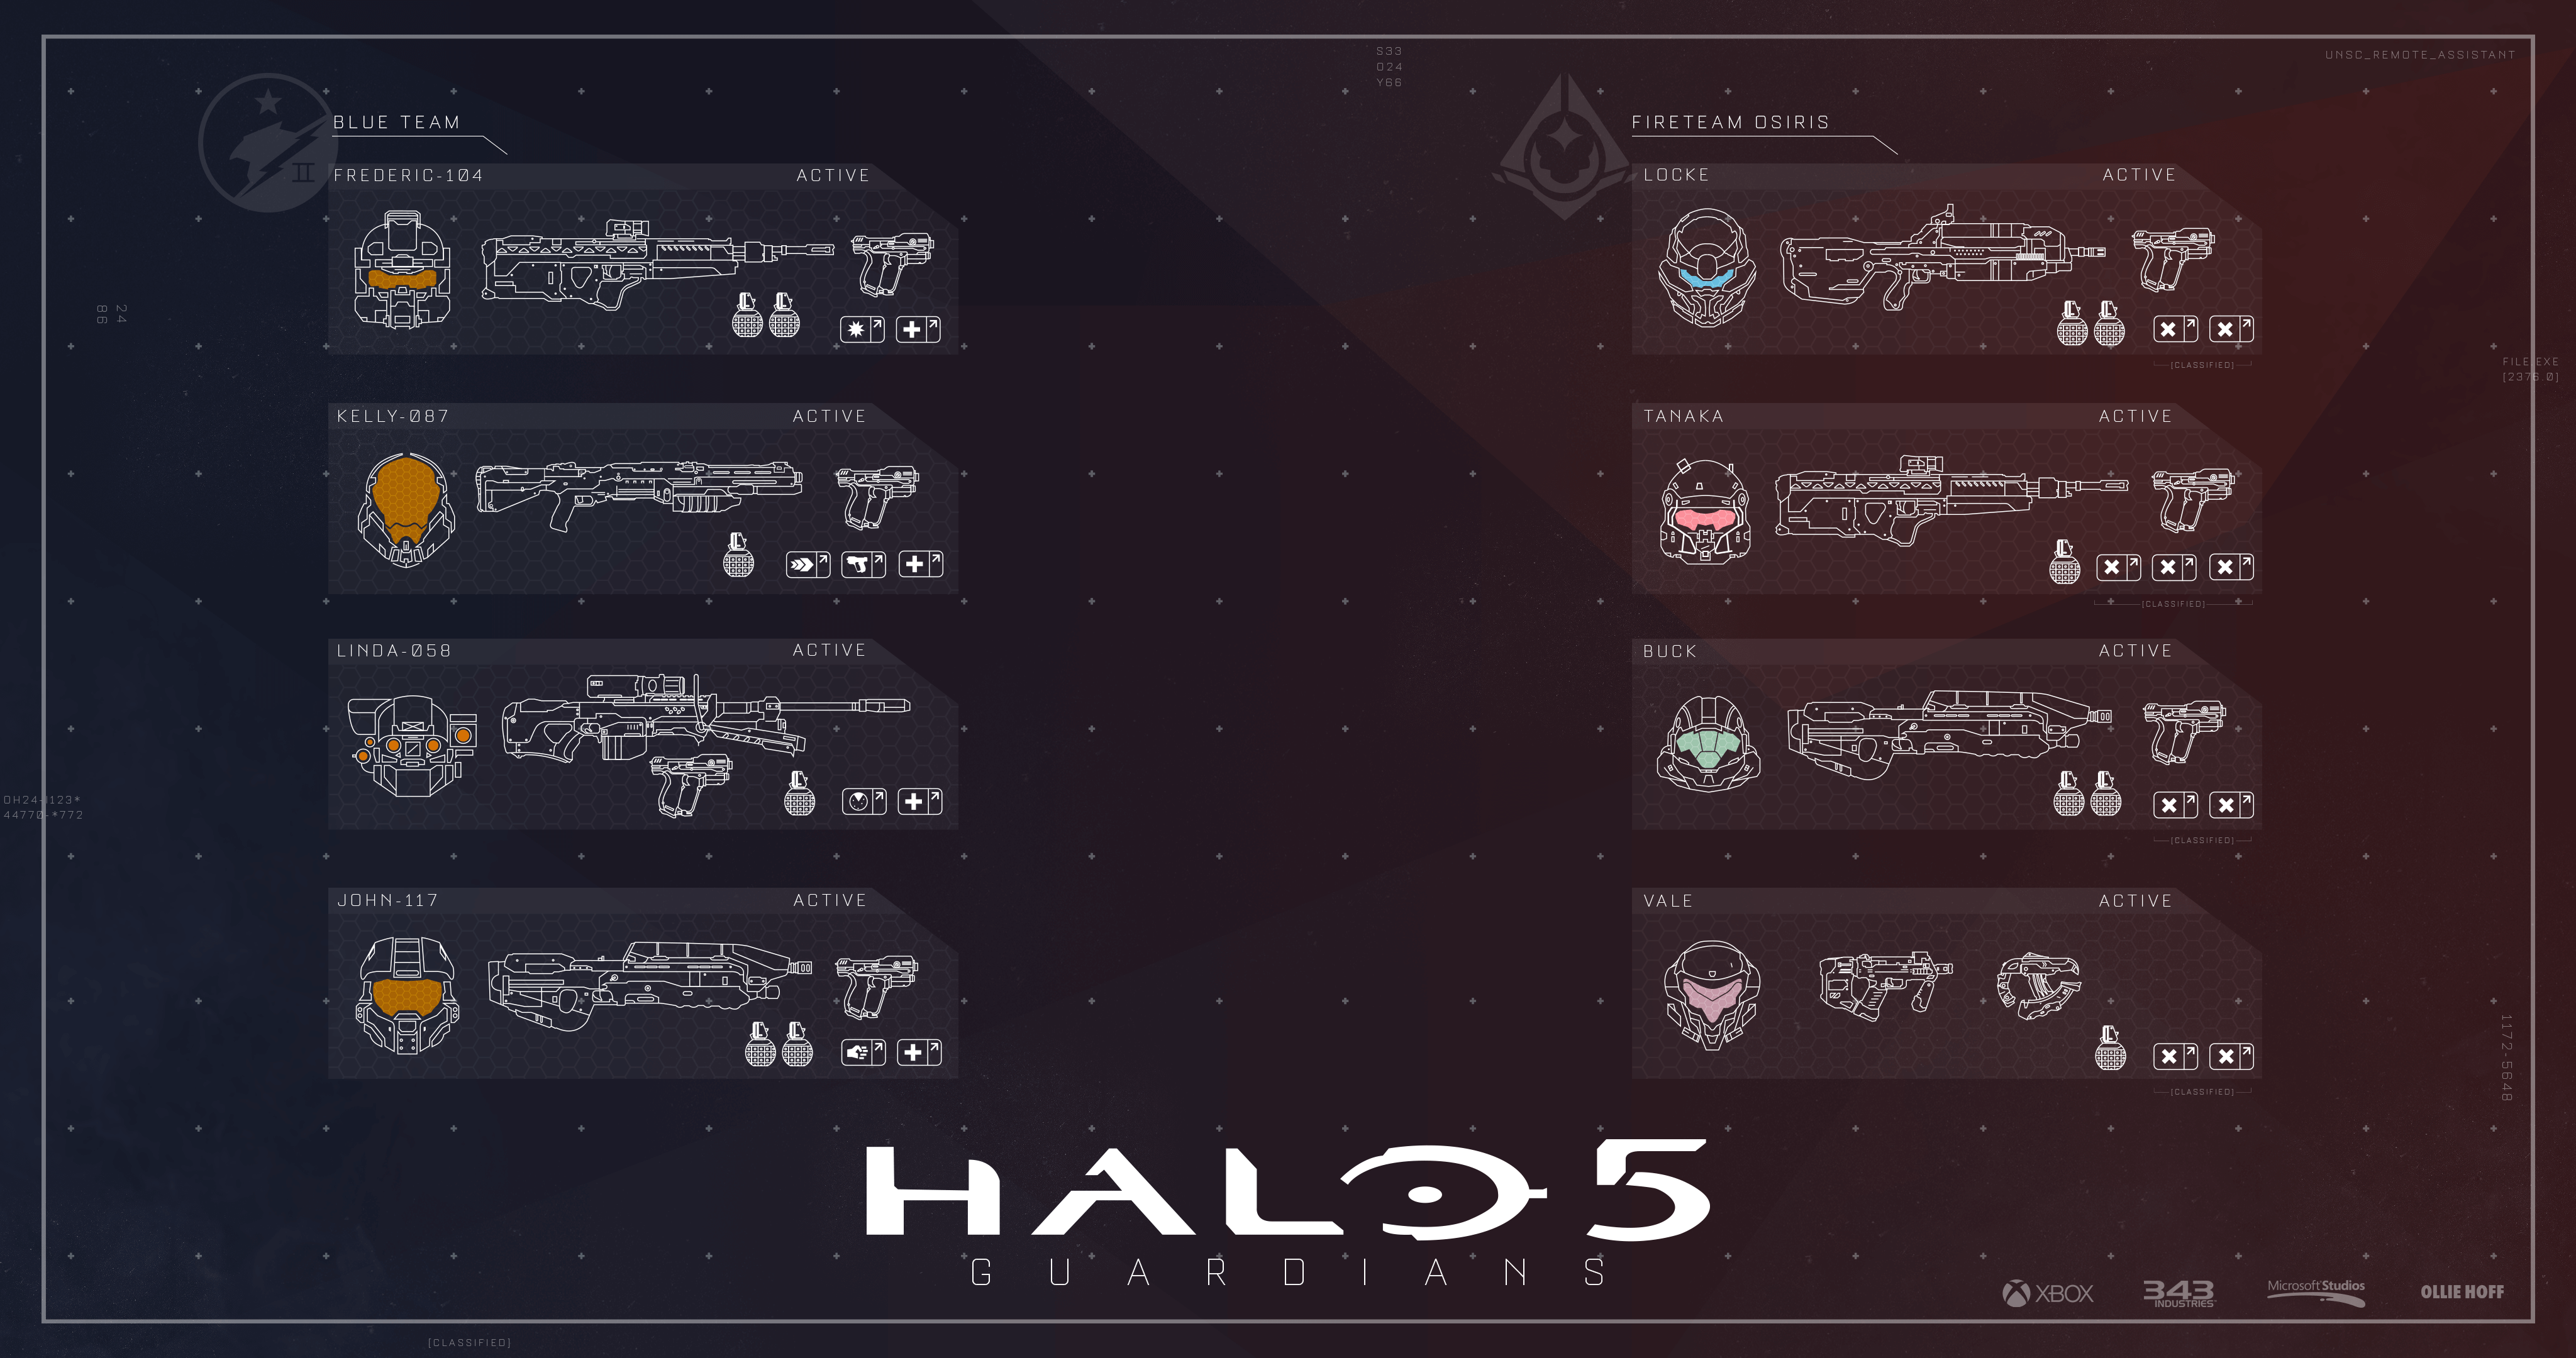 Halo 5 Guardians Halo Xbox Microsoft Master Chief 343 Industries Video Games 4096x2160